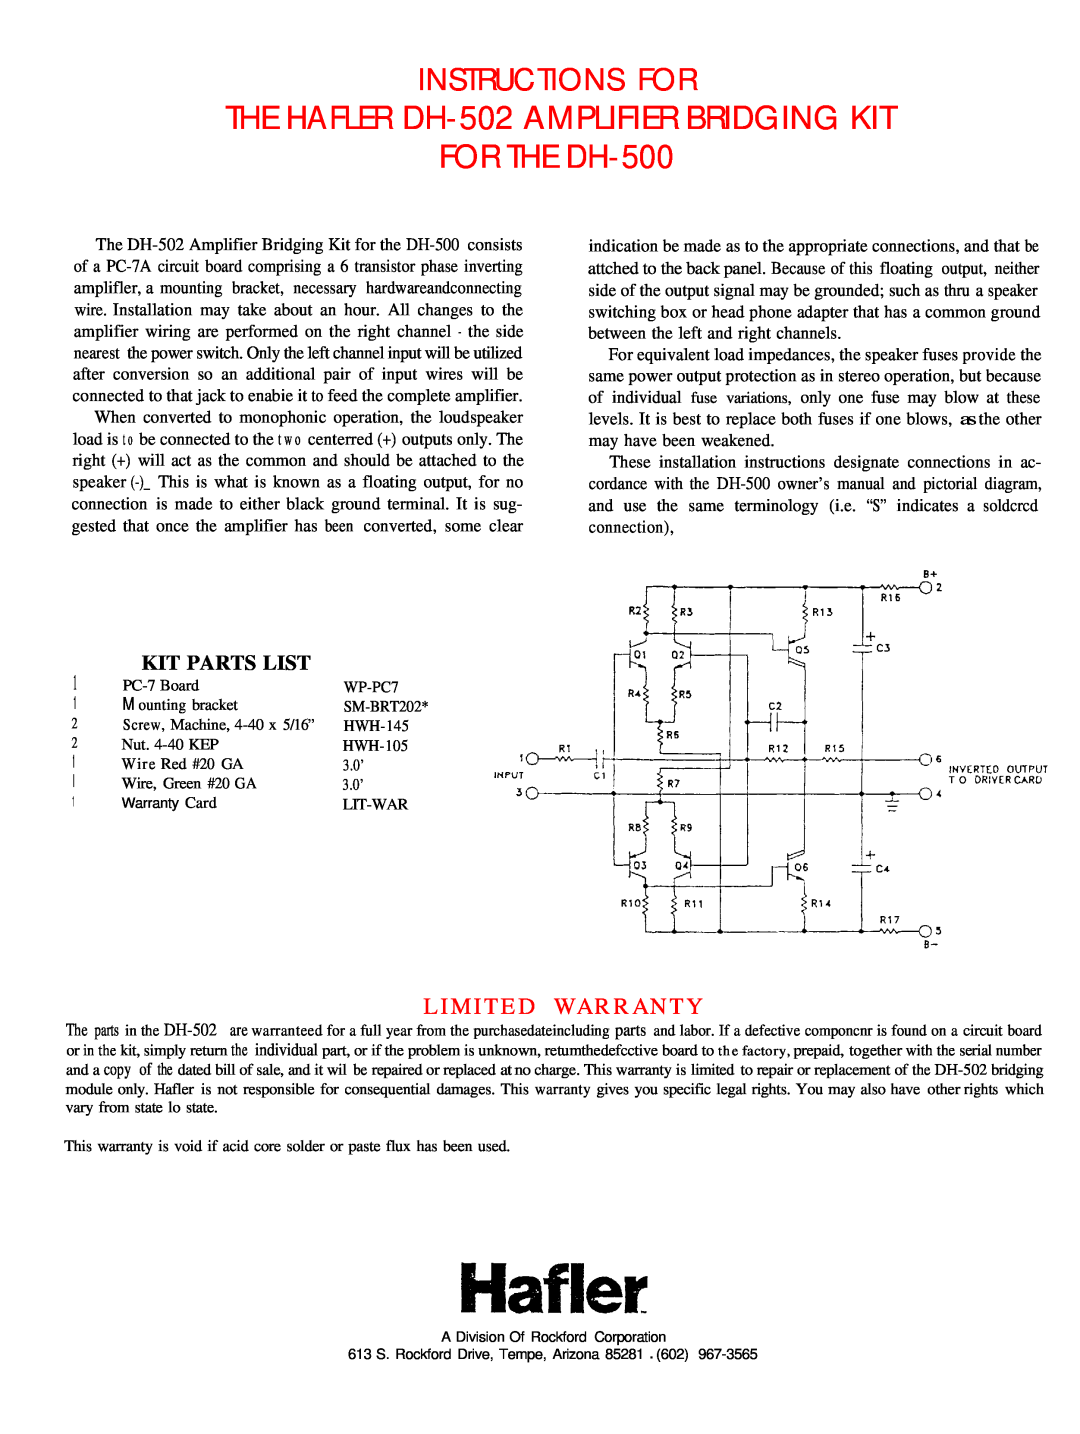 Hafler THE HAFLER DH-502AMPLIFIER BRIDGING KIT, FOR THE DH-500, Instructions For, Limited Warranty, Kit Parts List 